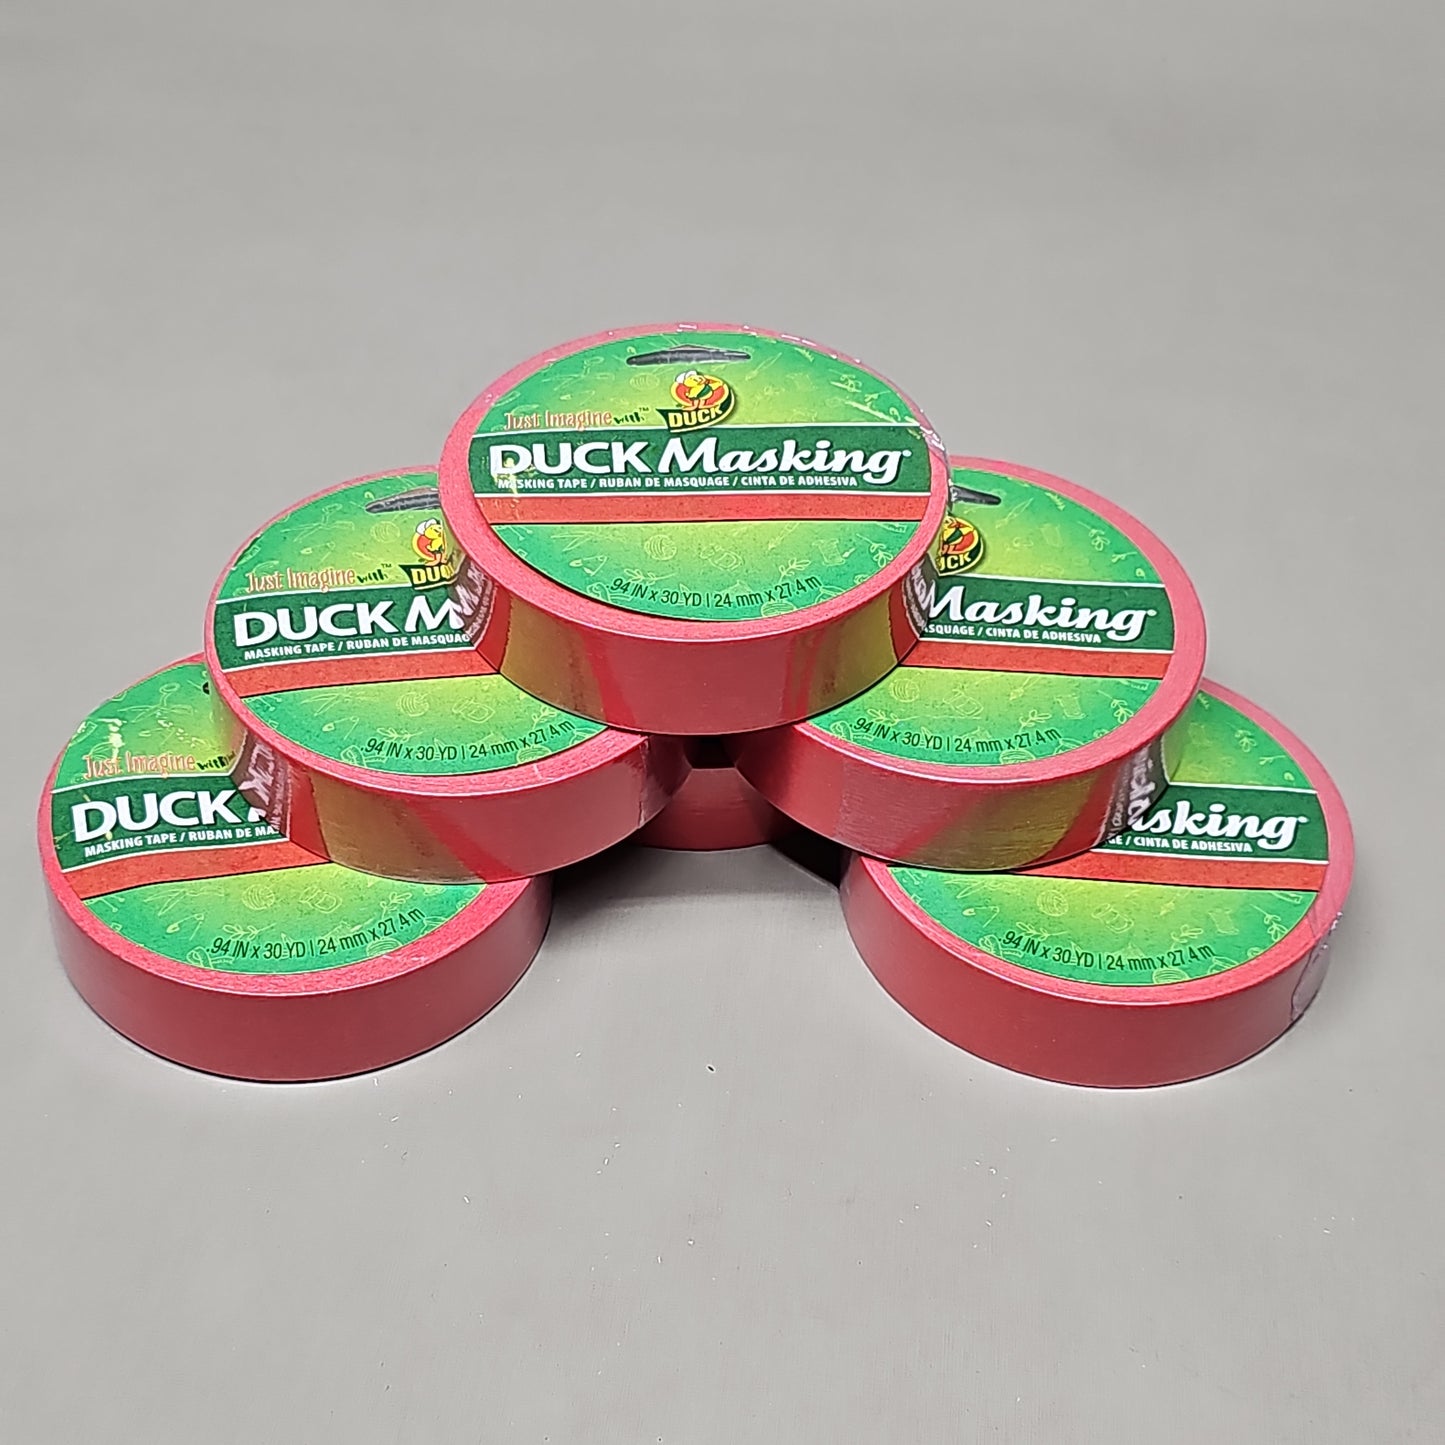 SHURTAPE DUCK Pack of 6 Duck Masking Tape .94" x 30 YD Red (New)